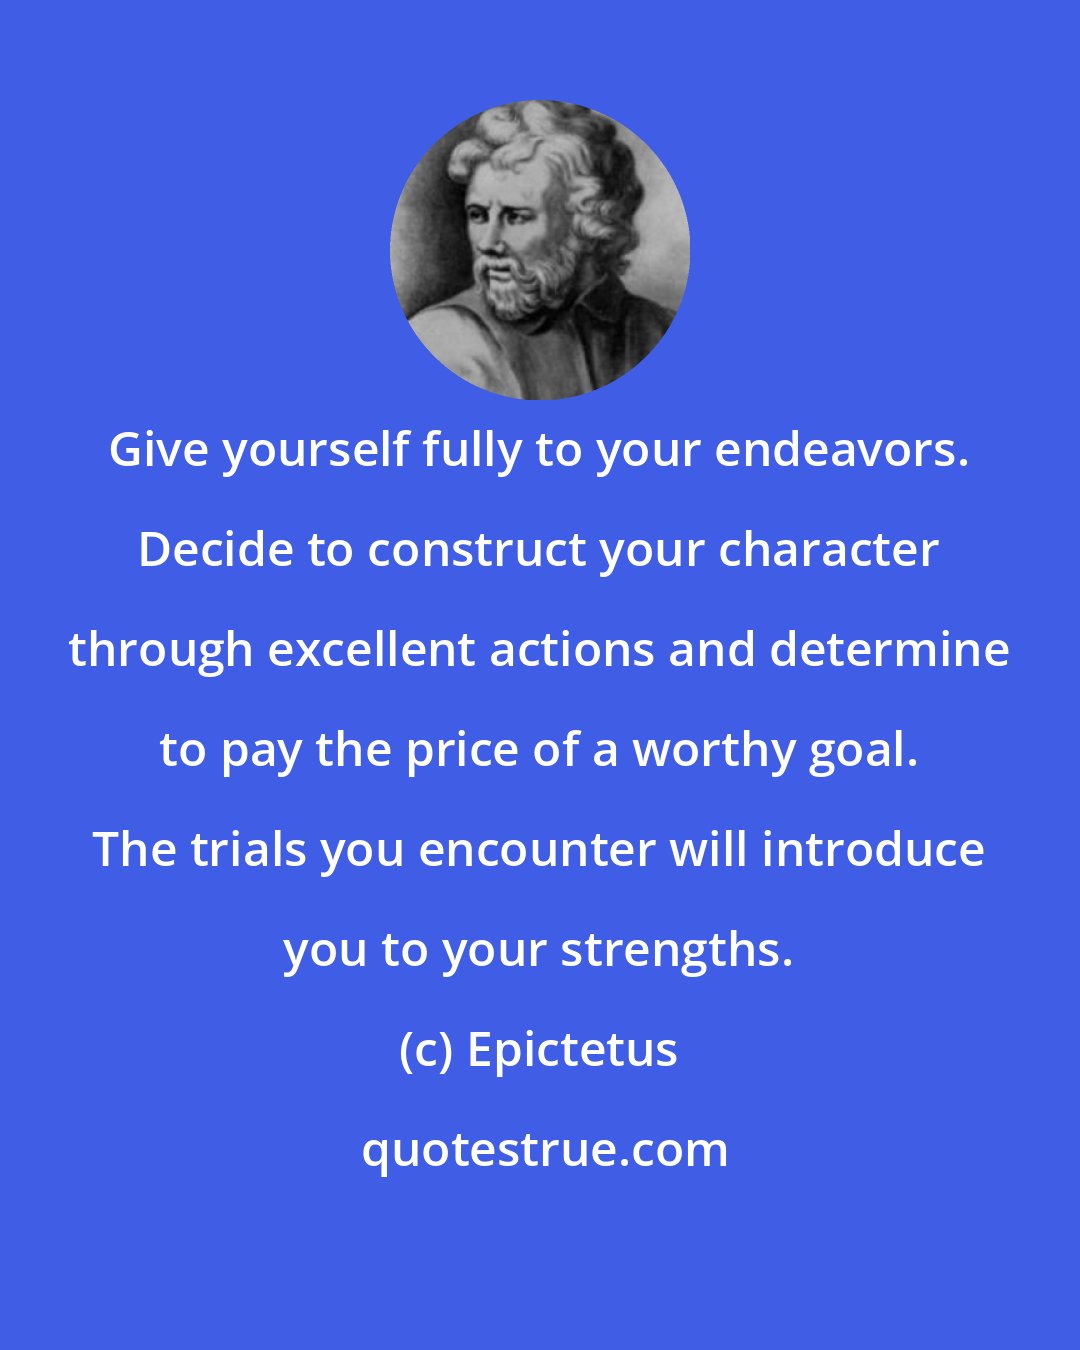 Epictetus: Give yourself fully to your endeavors. Decide to construct your character through excellent actions and determine to pay the price of a worthy goal. The trials you encounter will introduce you to your strengths.